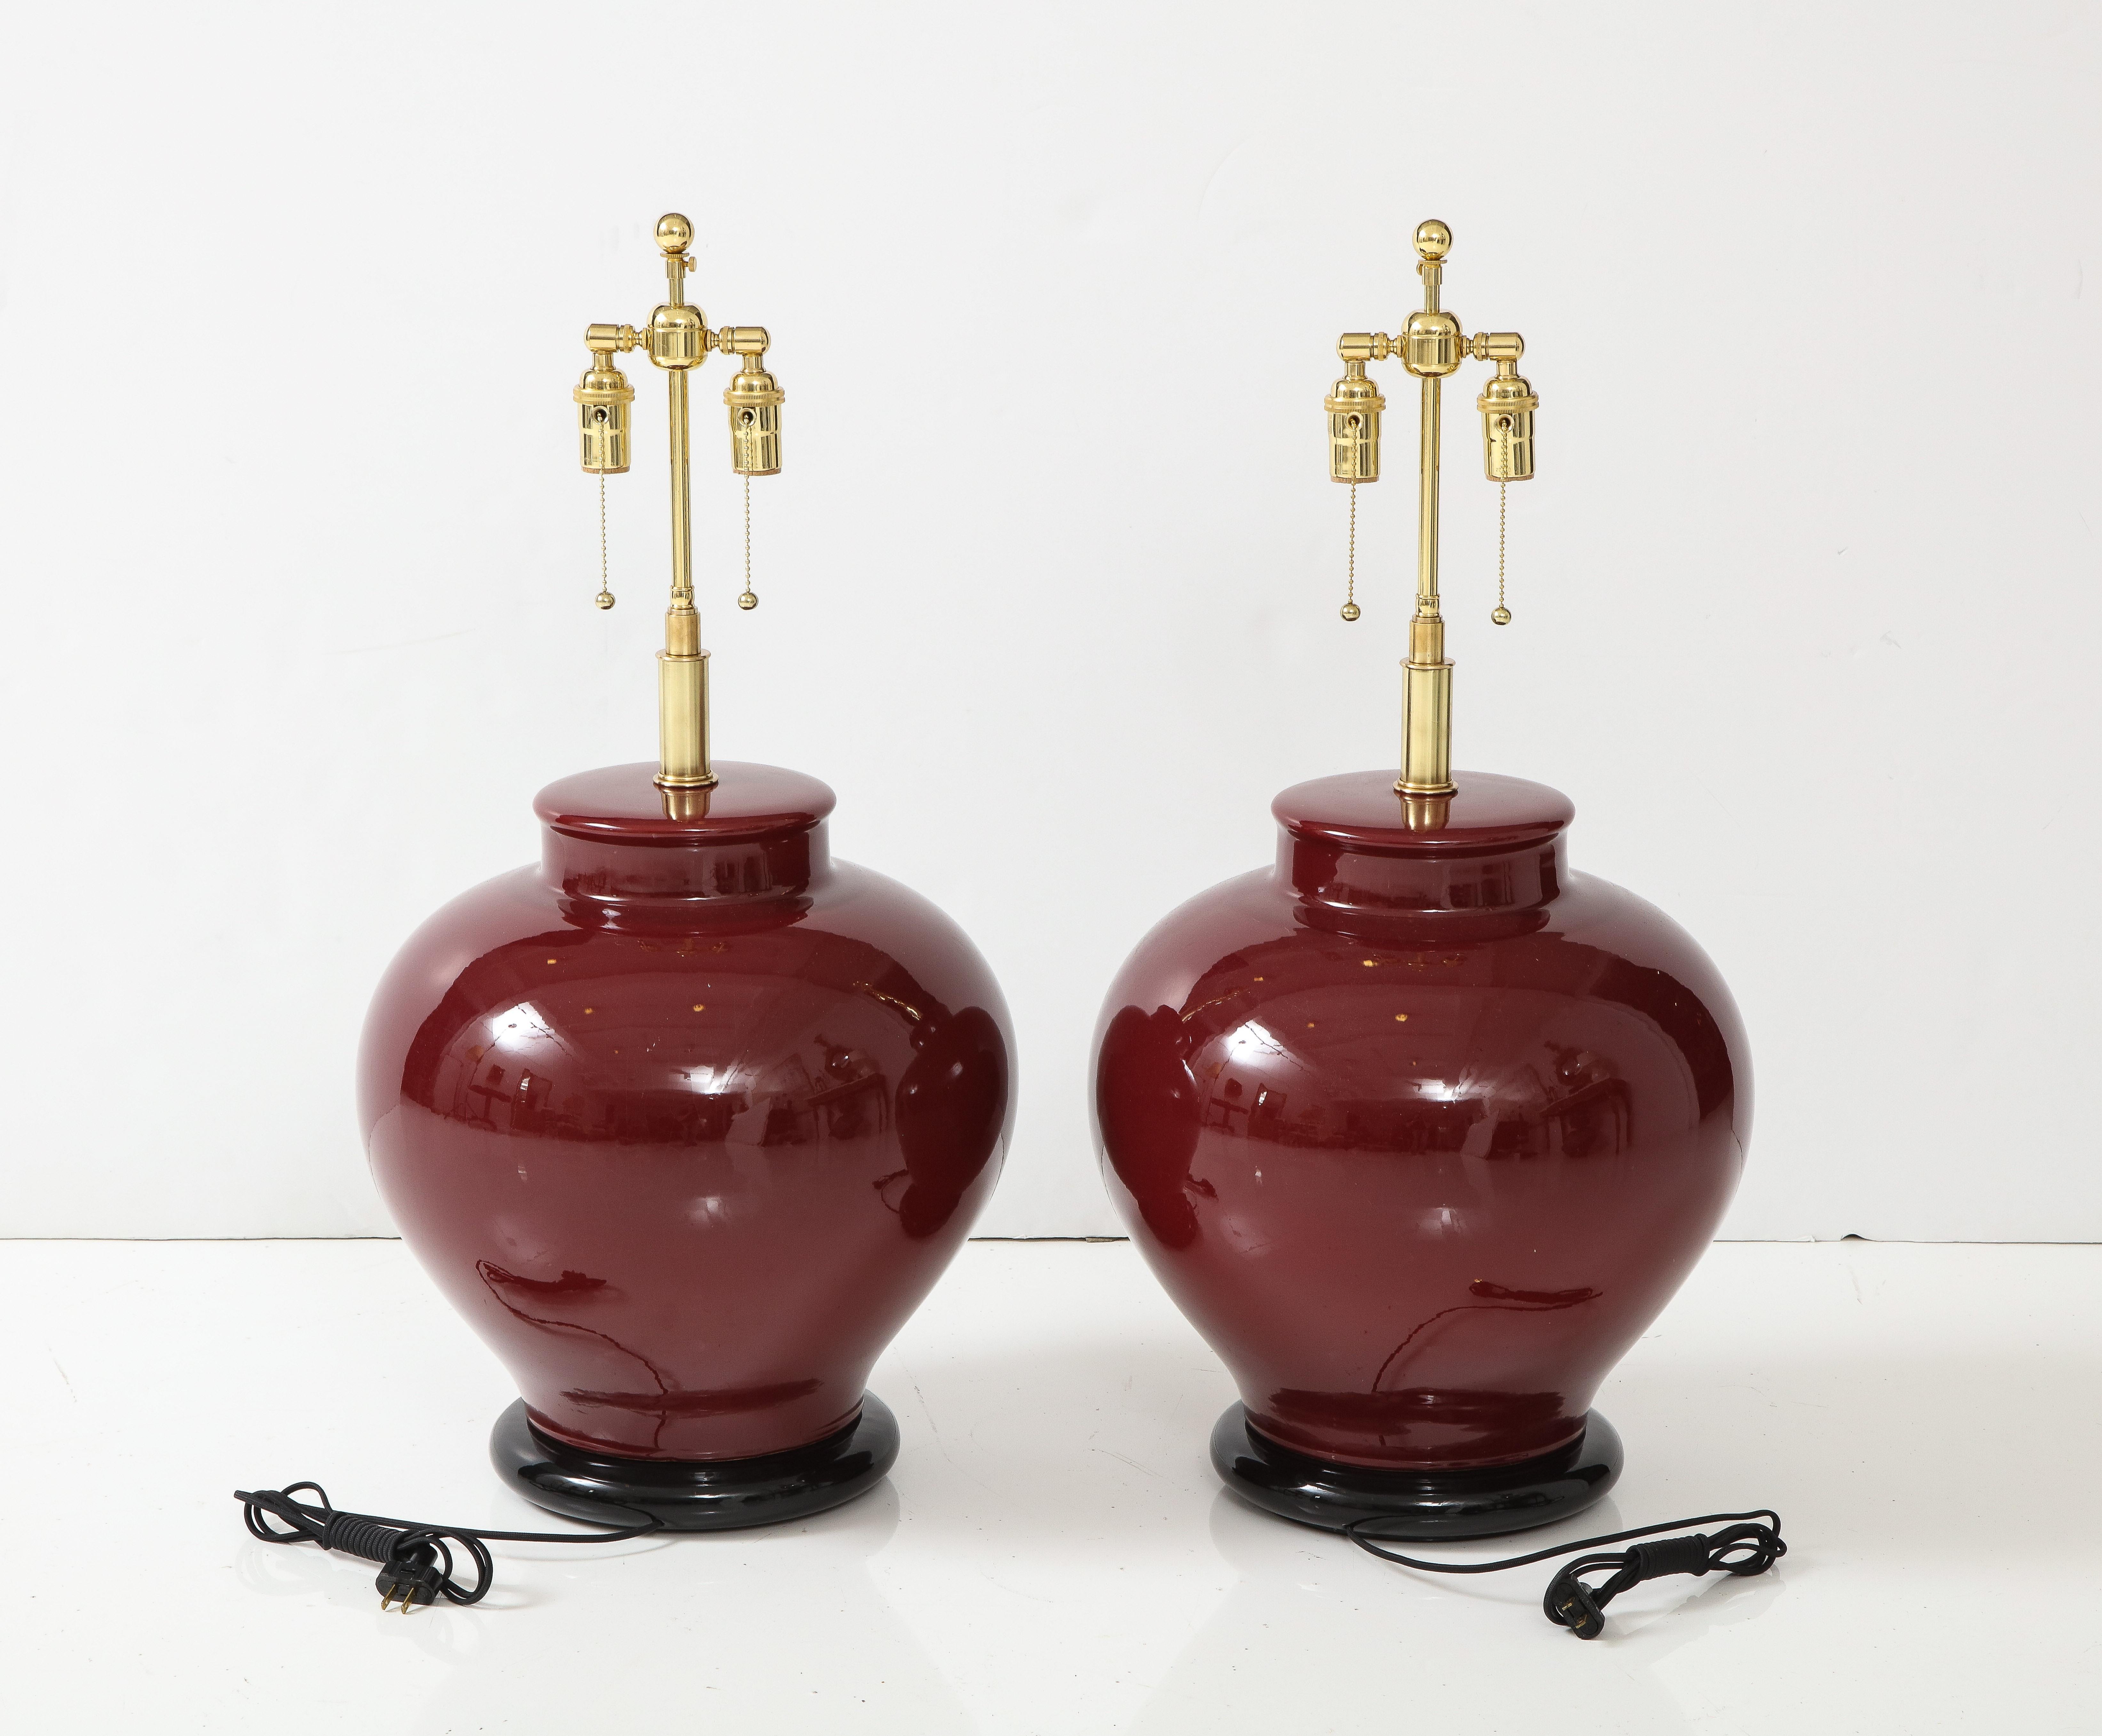 Pair of Large Ceramic Lamps with a Rich Burgundy Glaze Finish For Sale 1